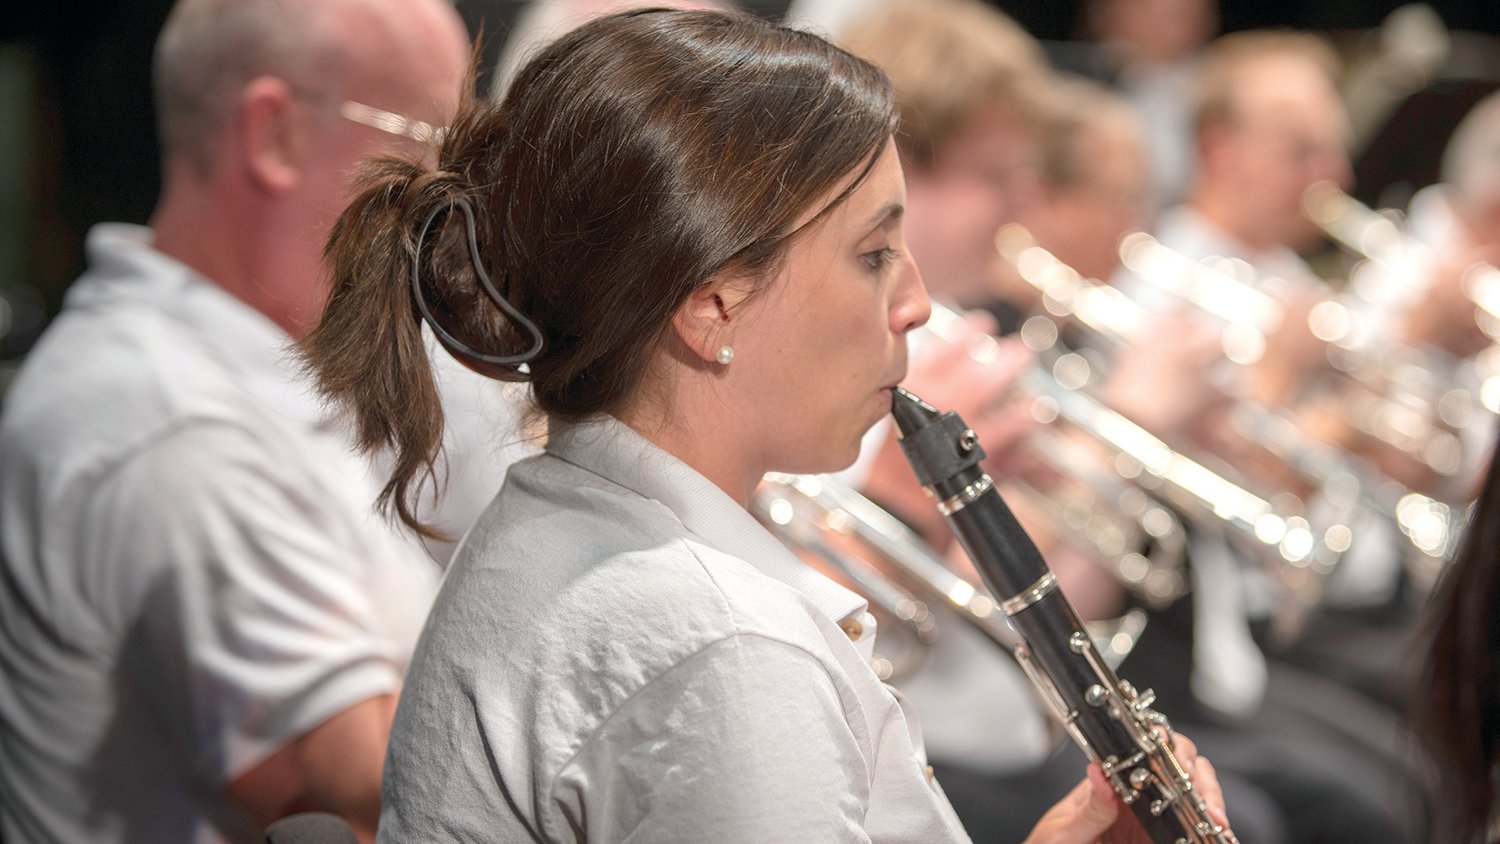 Sarah Ray, a Warrensburg High School faculty member, performs clarinet for the Warrensburg Community Band during the President’s Lawn Concert on Monday, July 25.